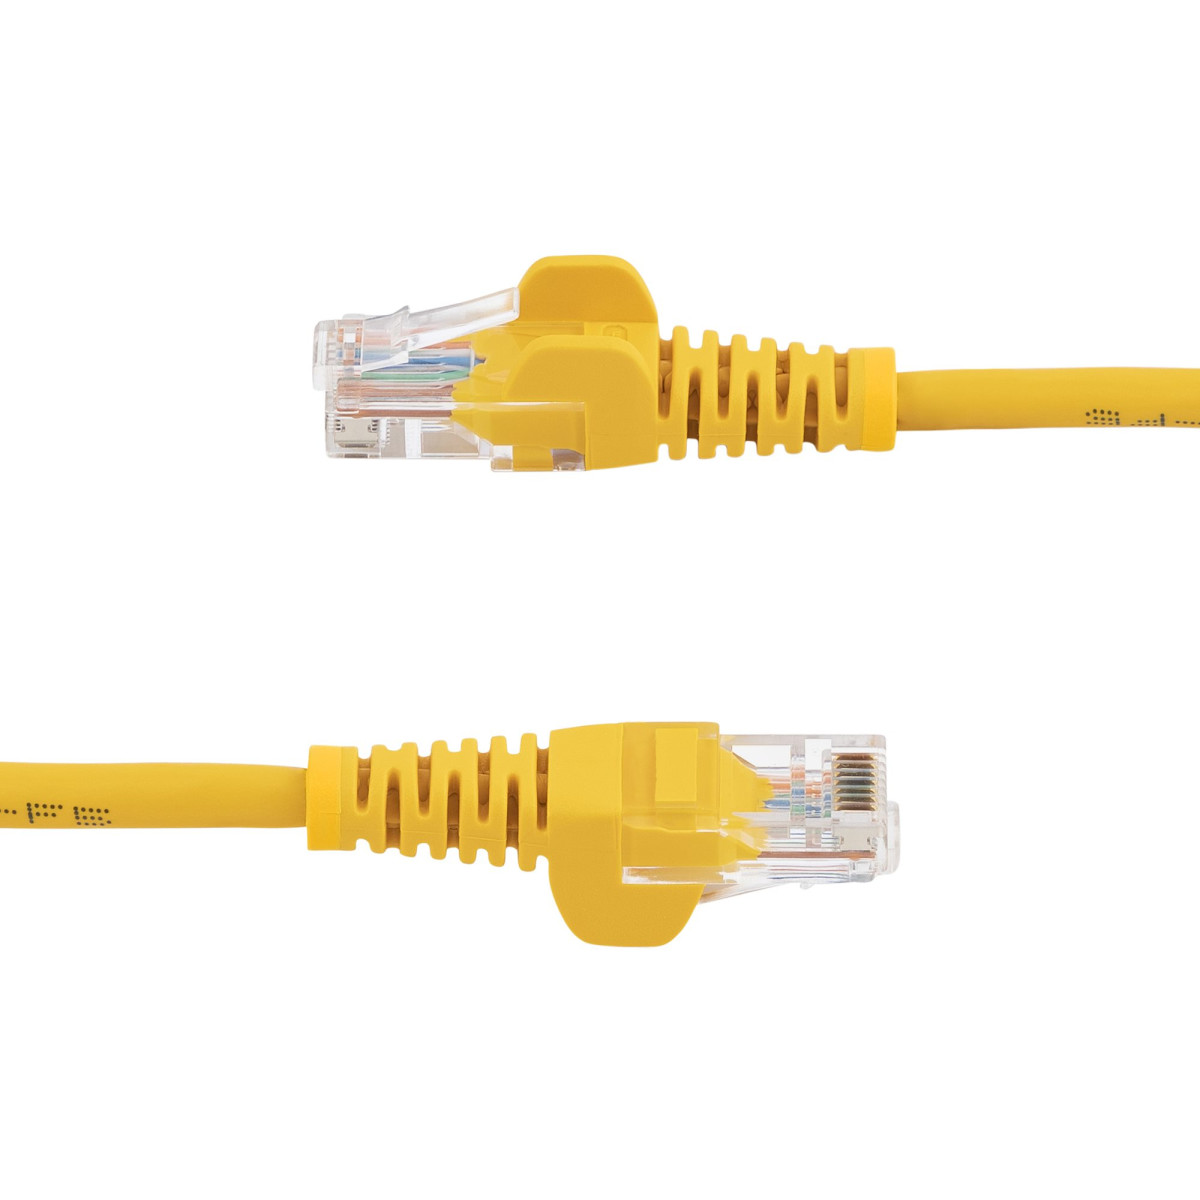 7m Yellow Snagless Cat5e Patch Cable